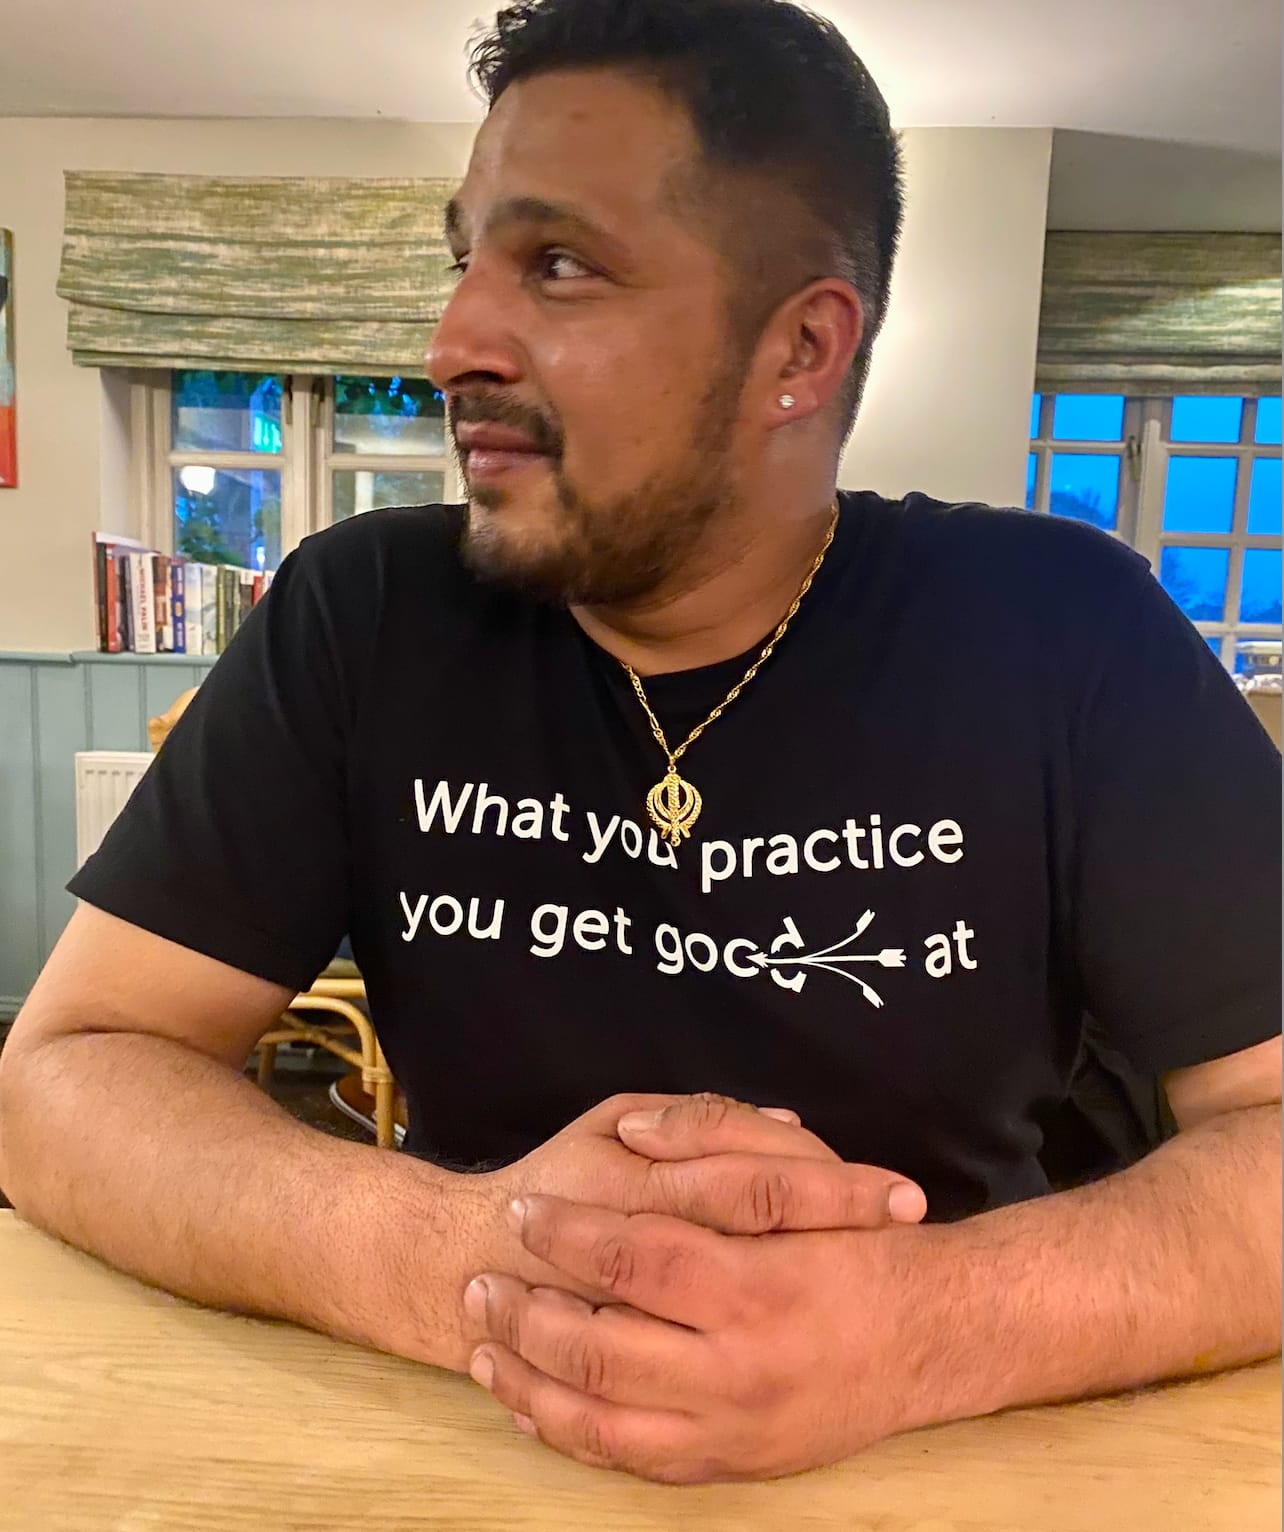 Billa Nanra wears a black T-shirt with a quote from Prem Rawat: "What you practice you get good at."